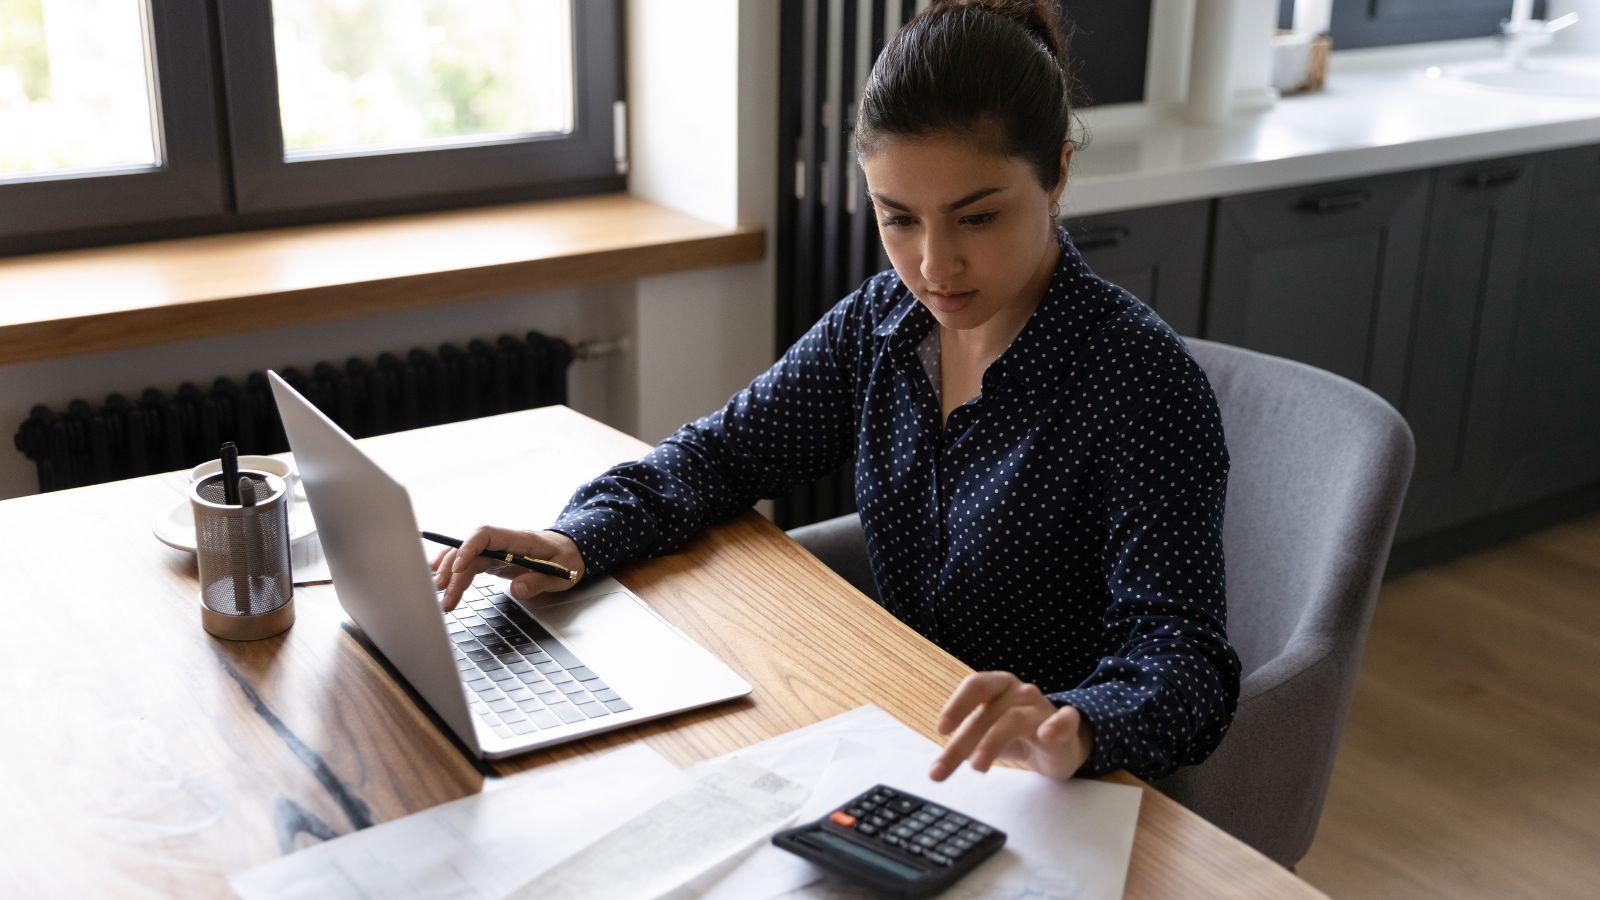 financial reports - lady at desk with computer and calculator